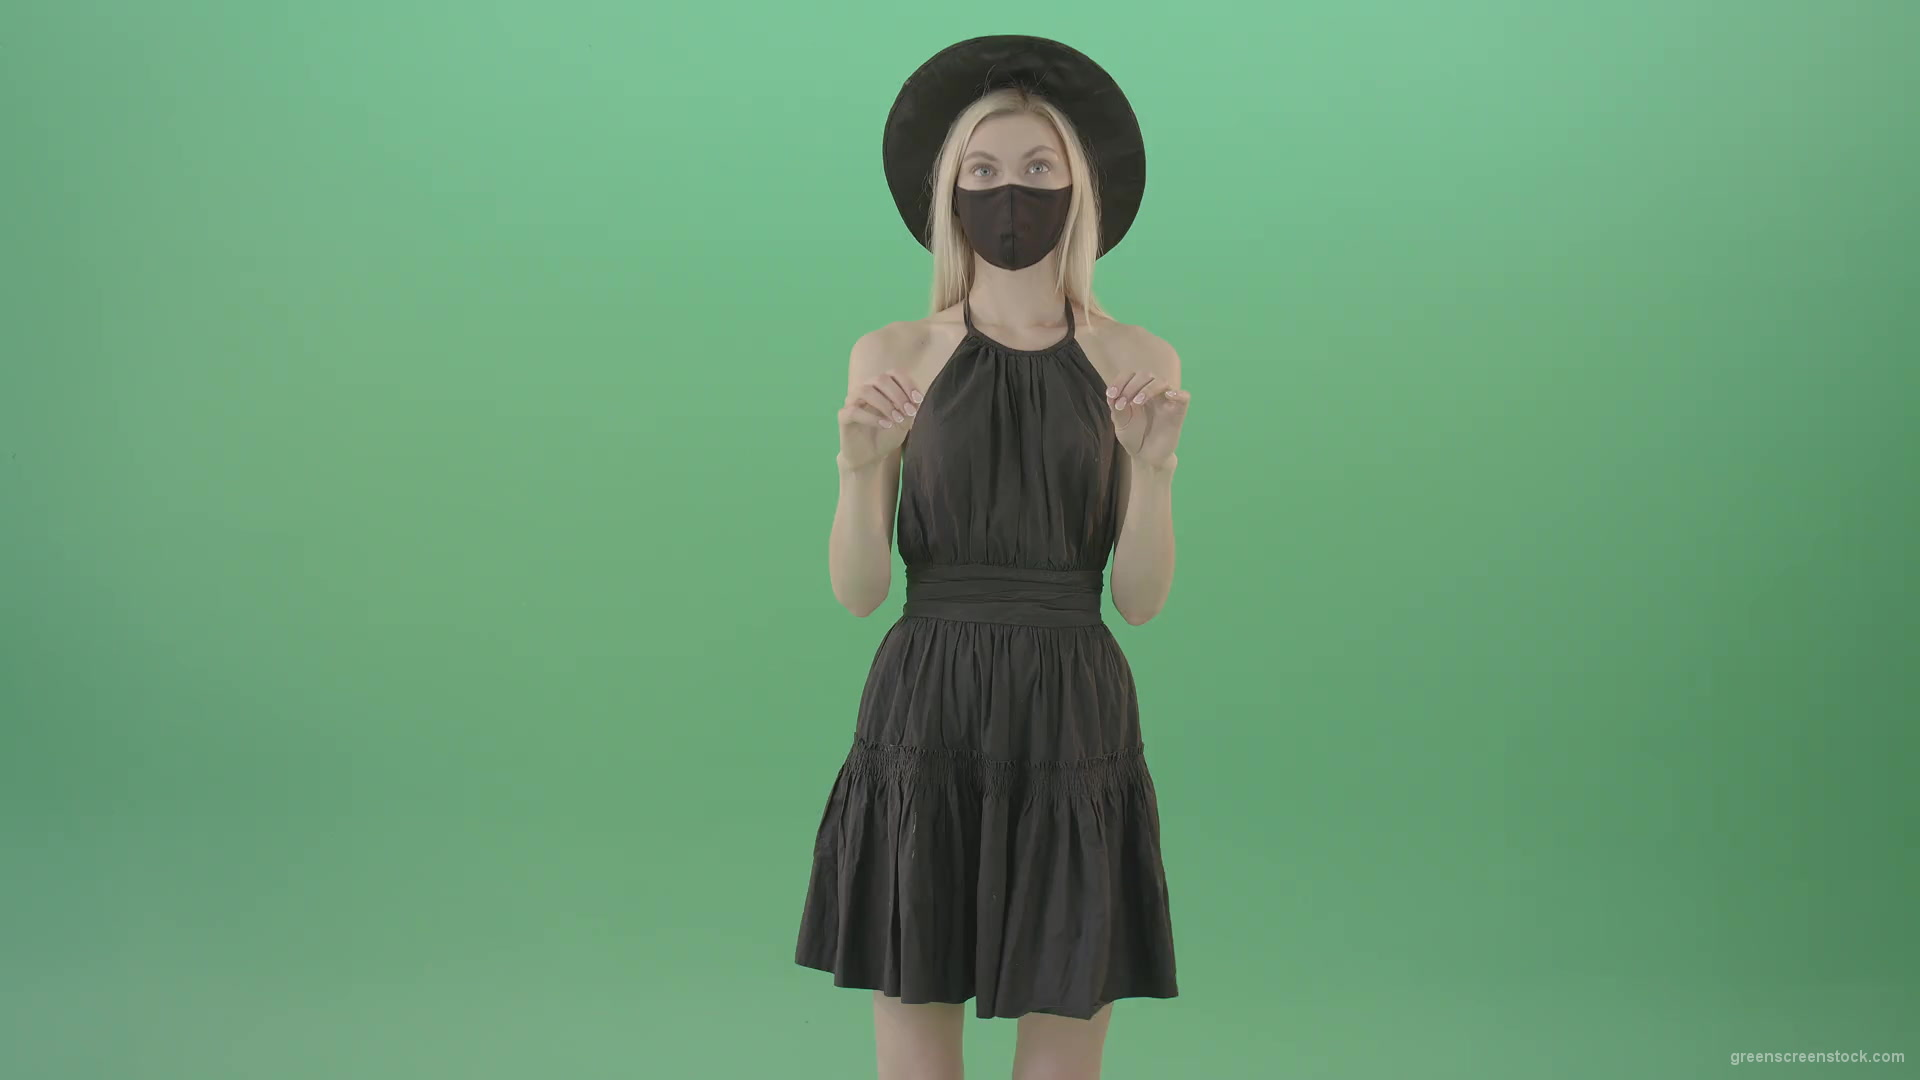 Covid-19-girl-in-black-mask-working-on-virtual-keyboard-buttons-and-touch-screen-on-green-background-4K-Video-Footage-1920_001 Green Screen Stock